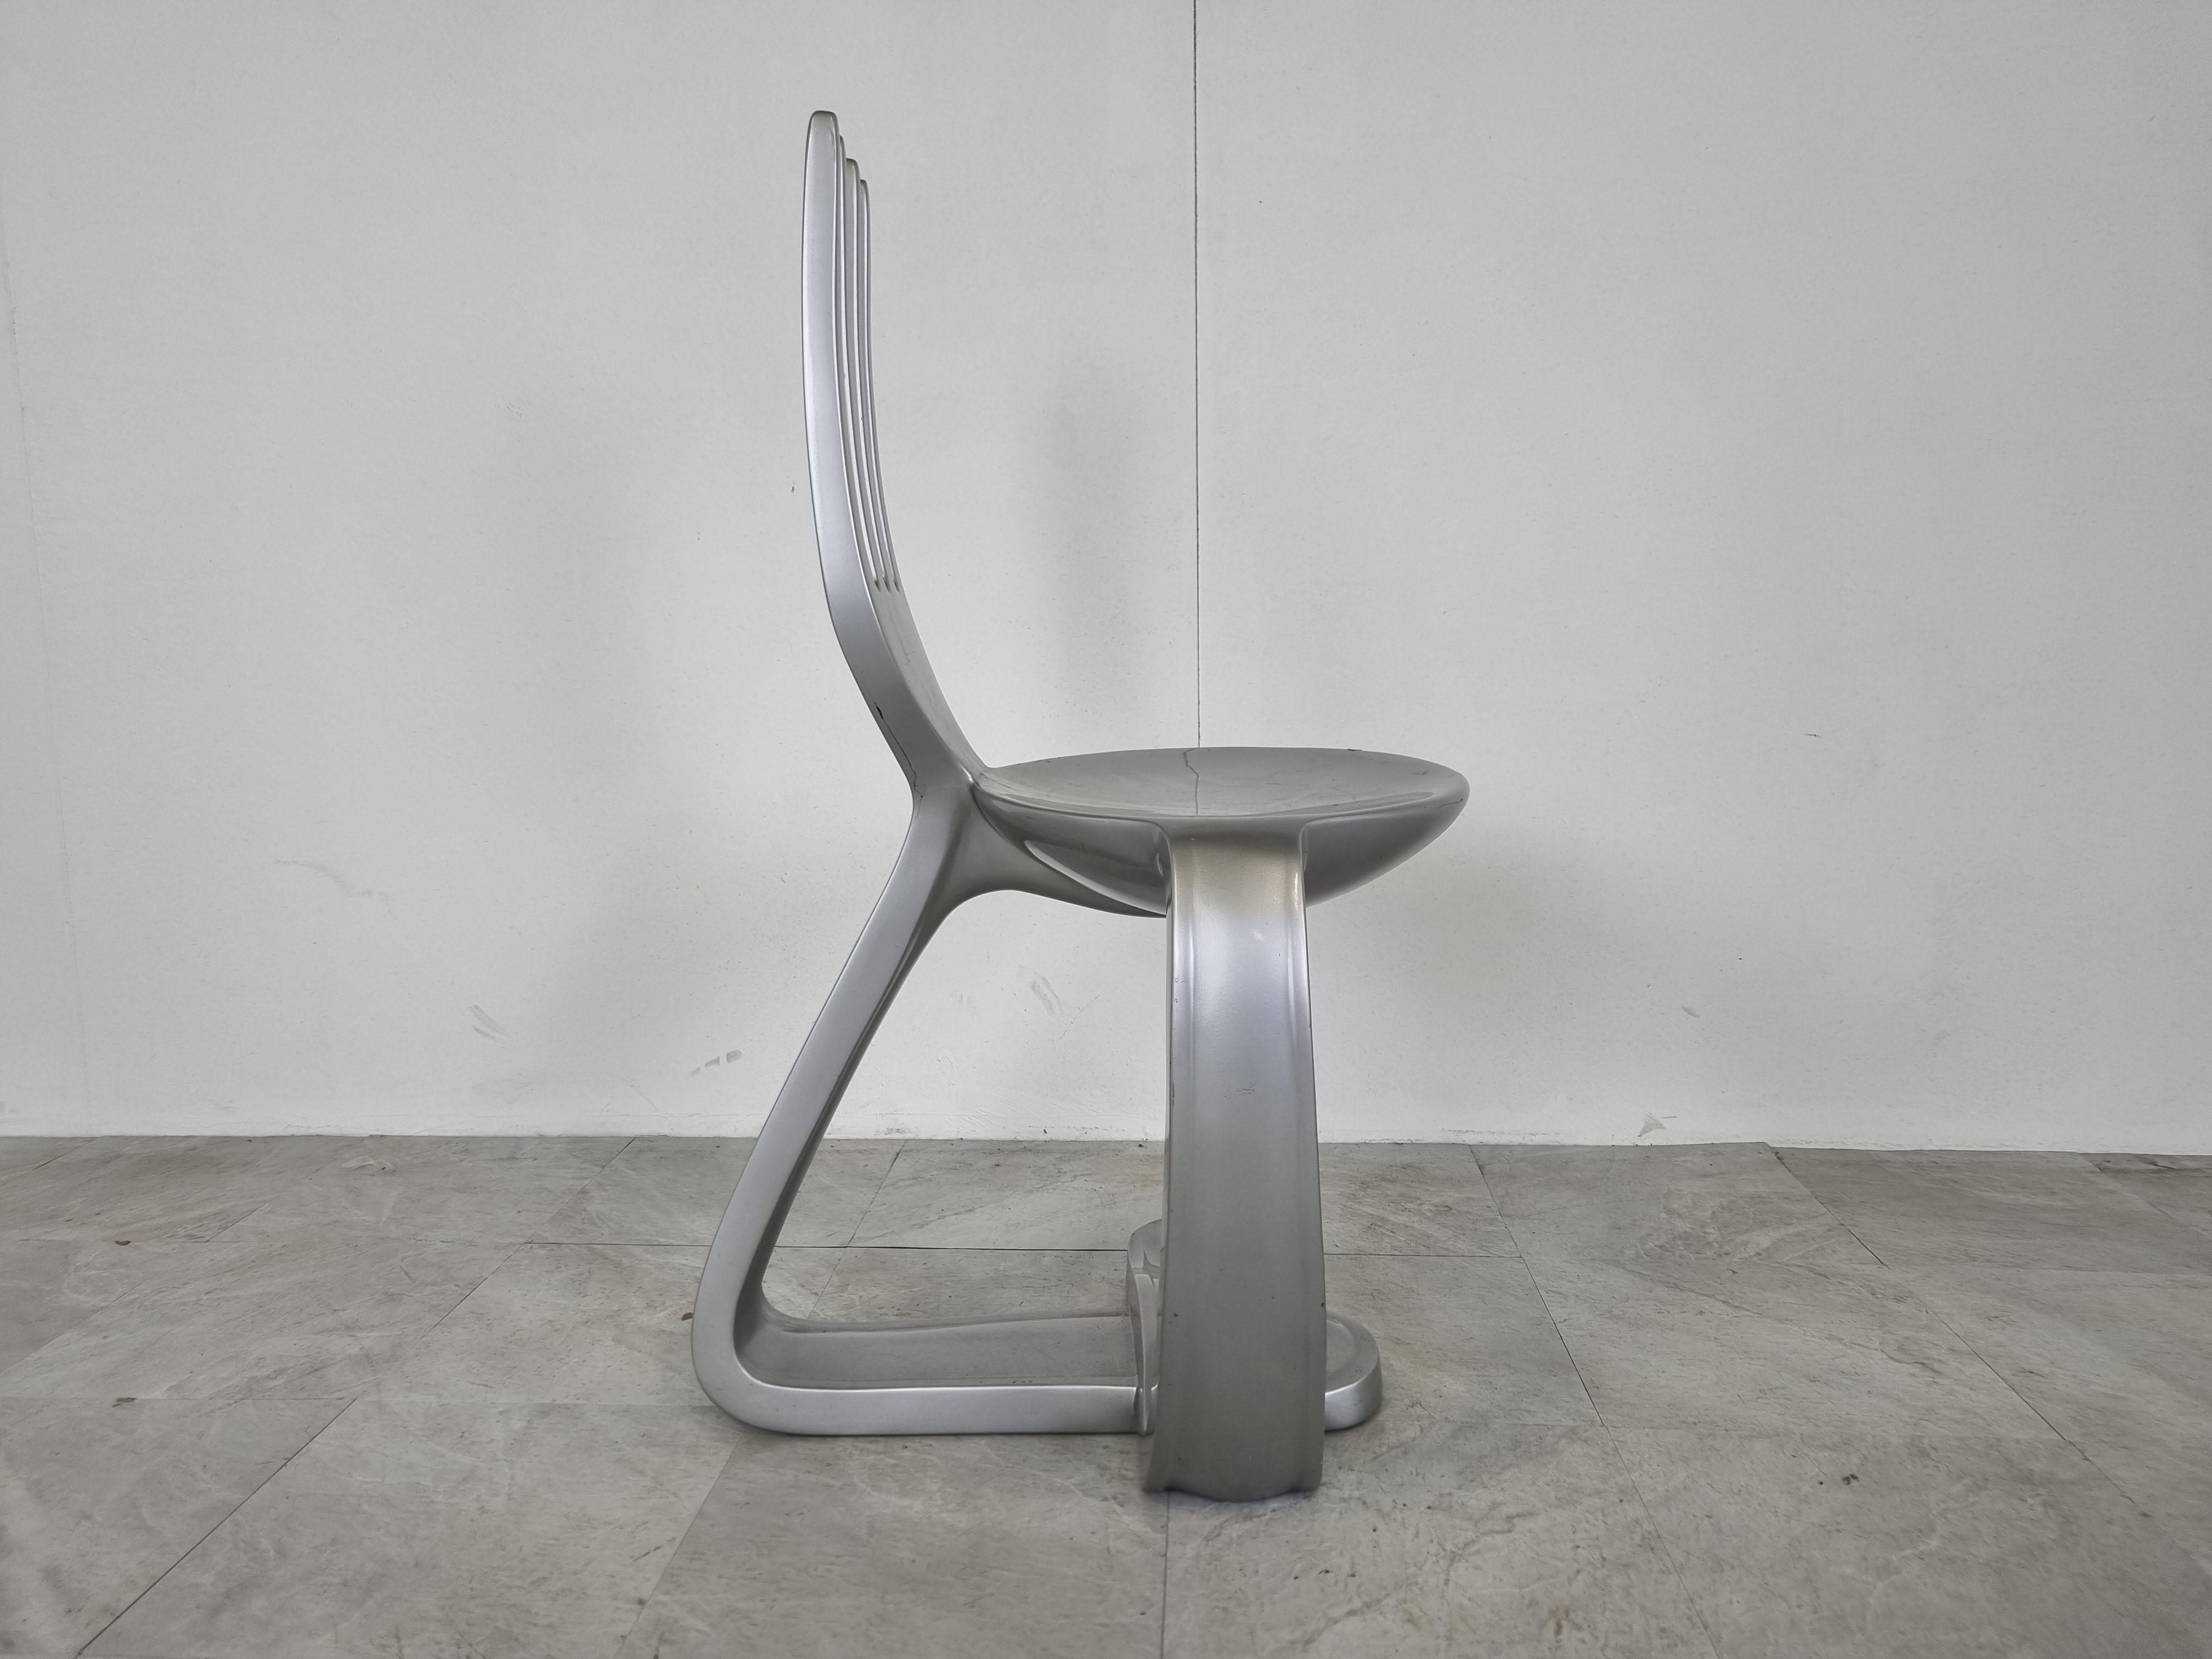 Fiberglass Vintage Spoon and Fork Chair, 1990s